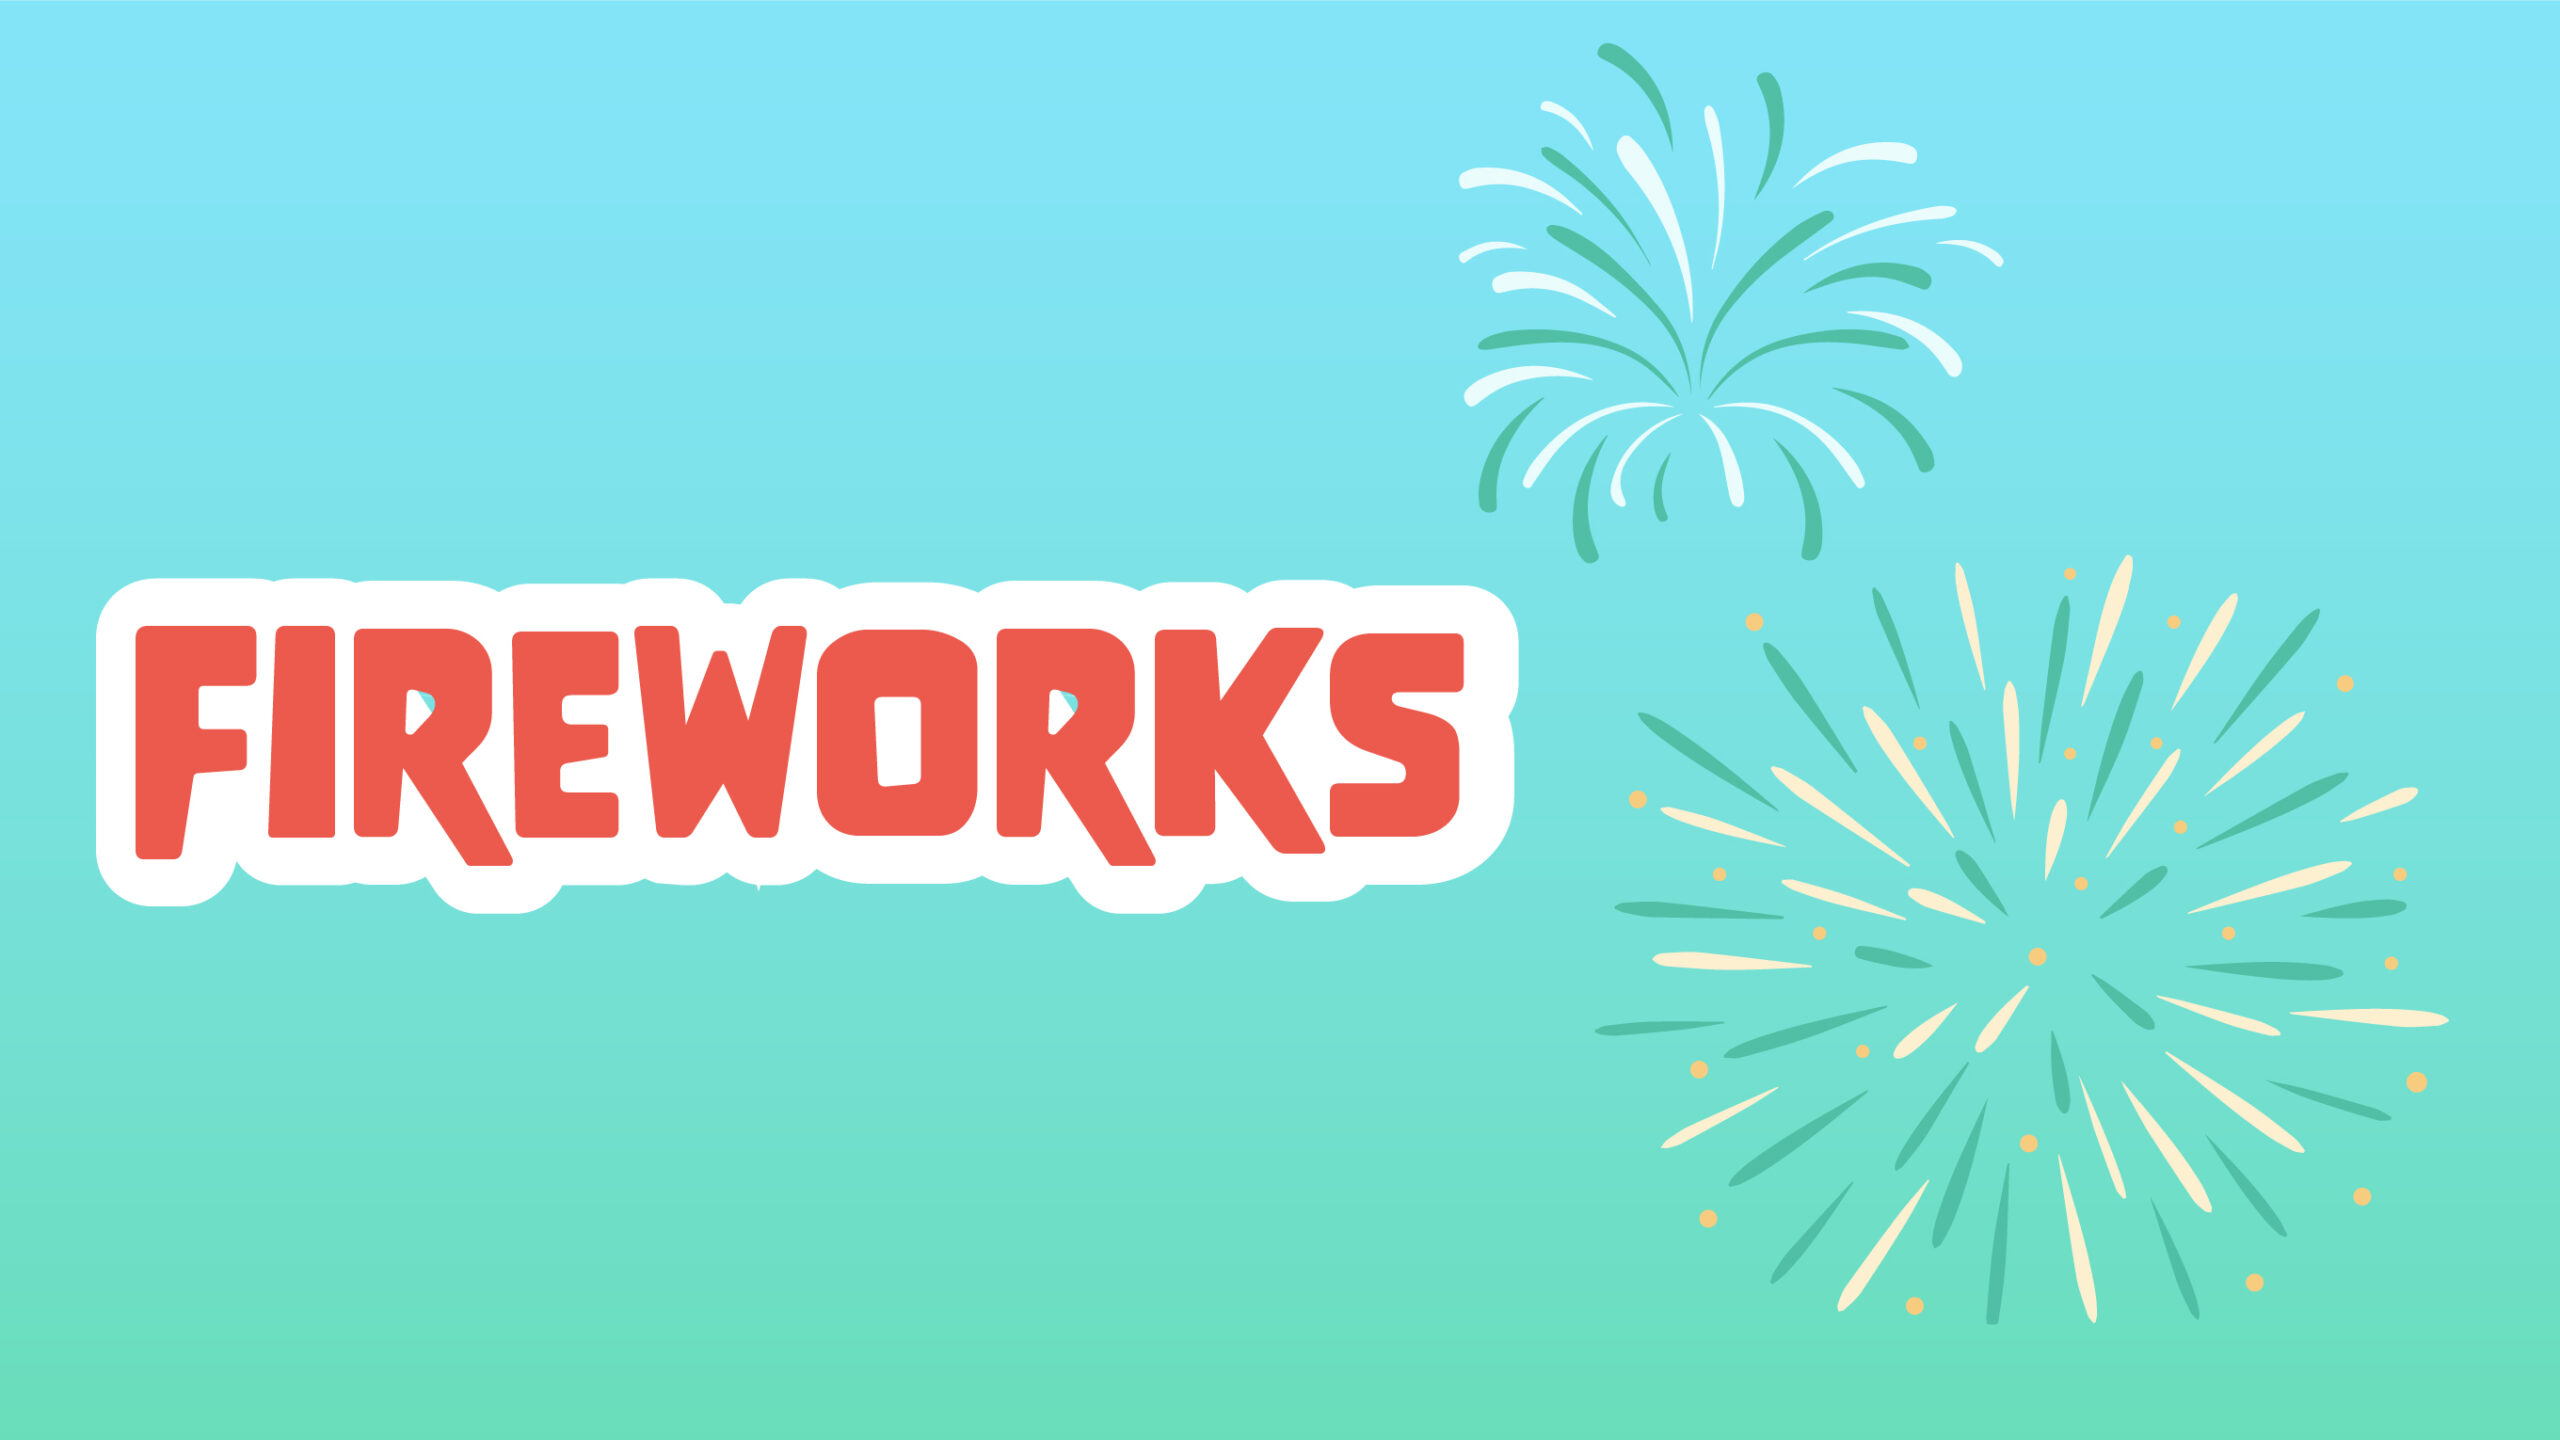 Fireworks Facts for Kids – 5 Fun Facts about Fireworks